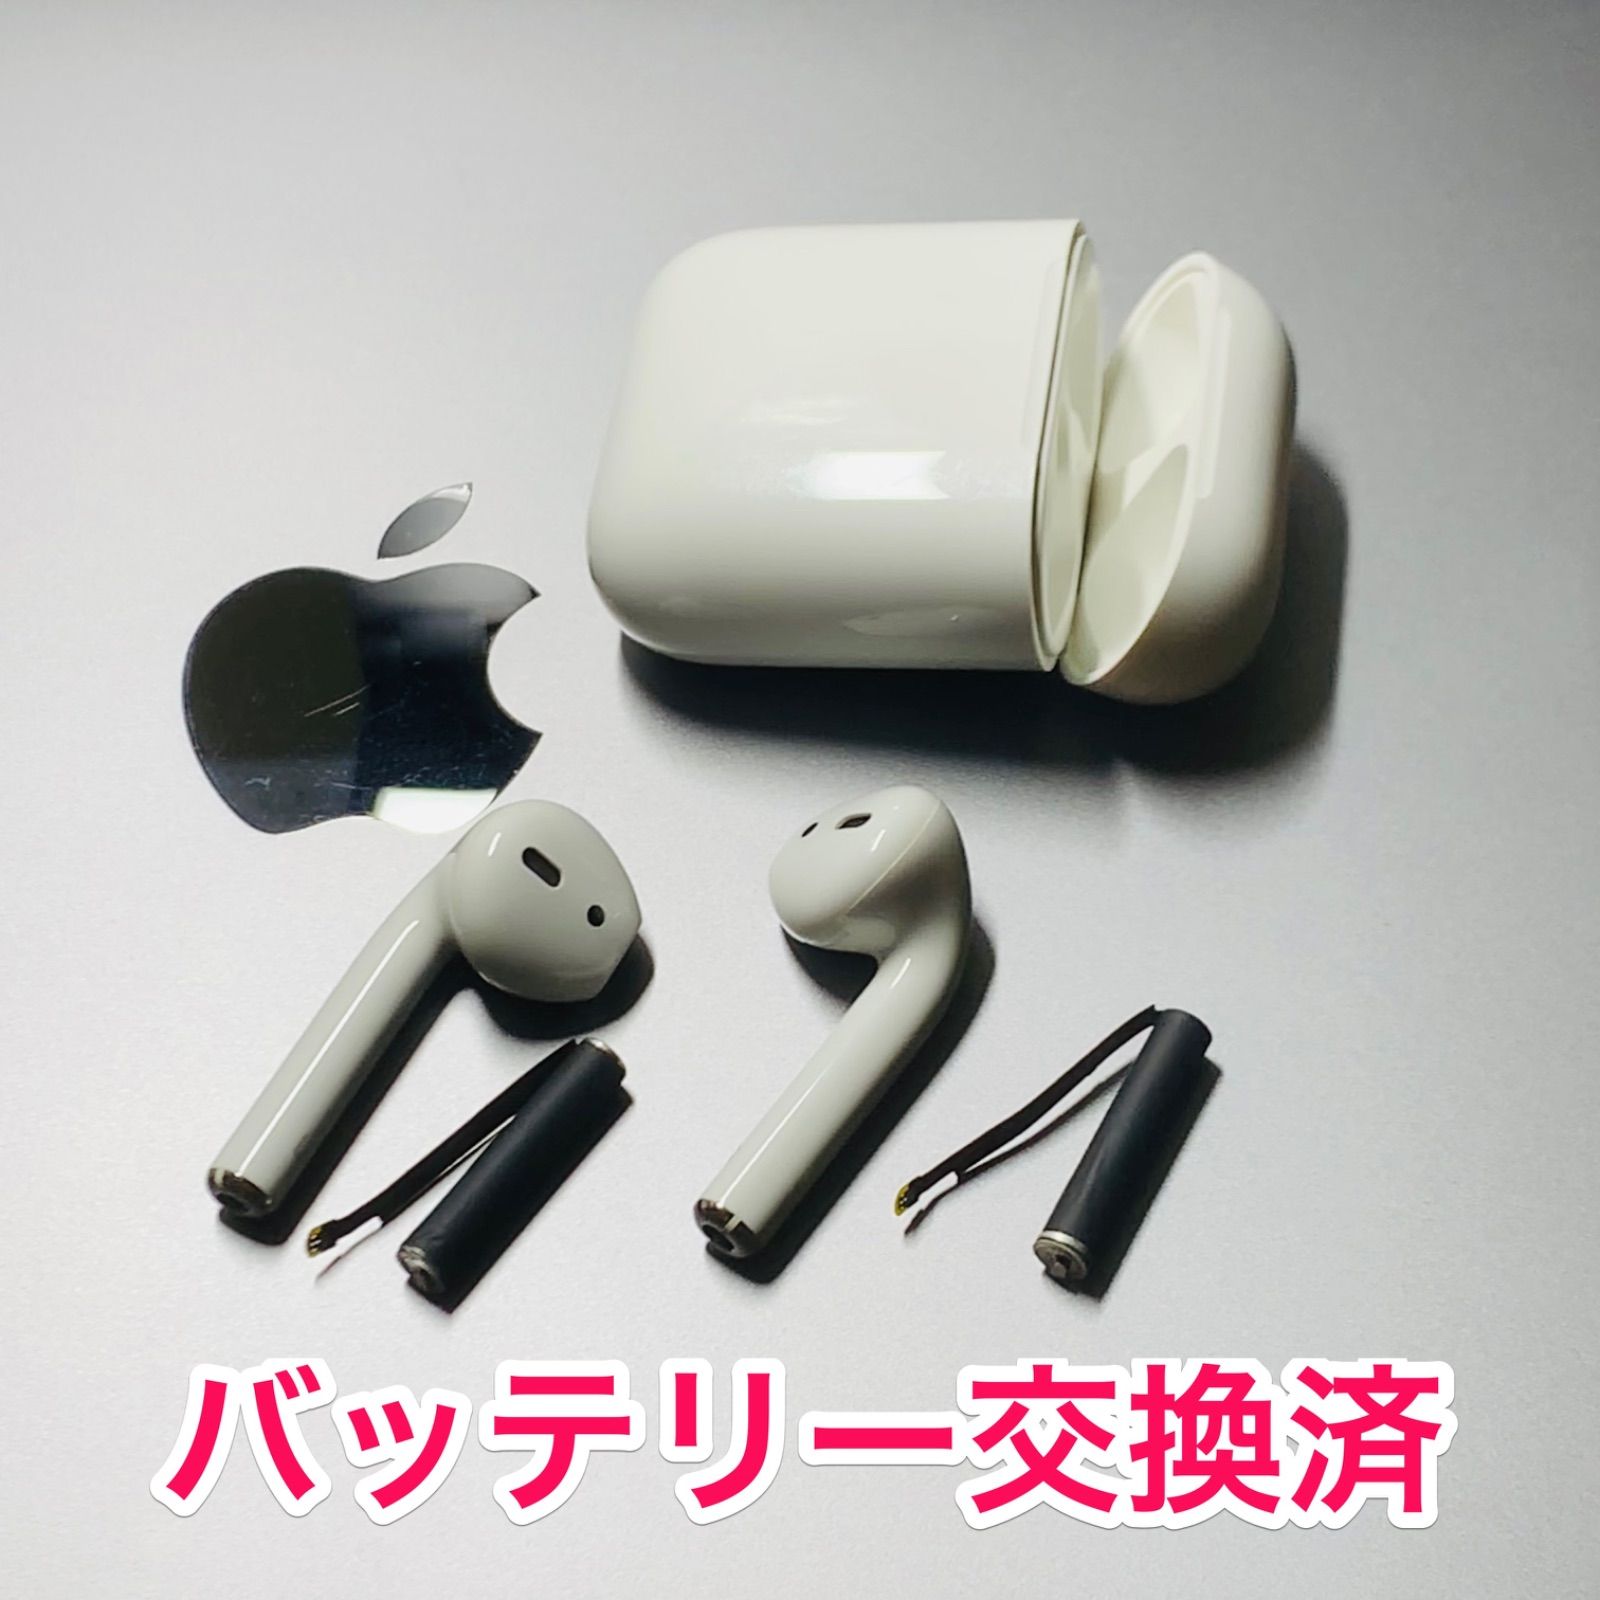 Apple AirPods 第二世代 バッテリー新品 / エアーポッズ バッテリー